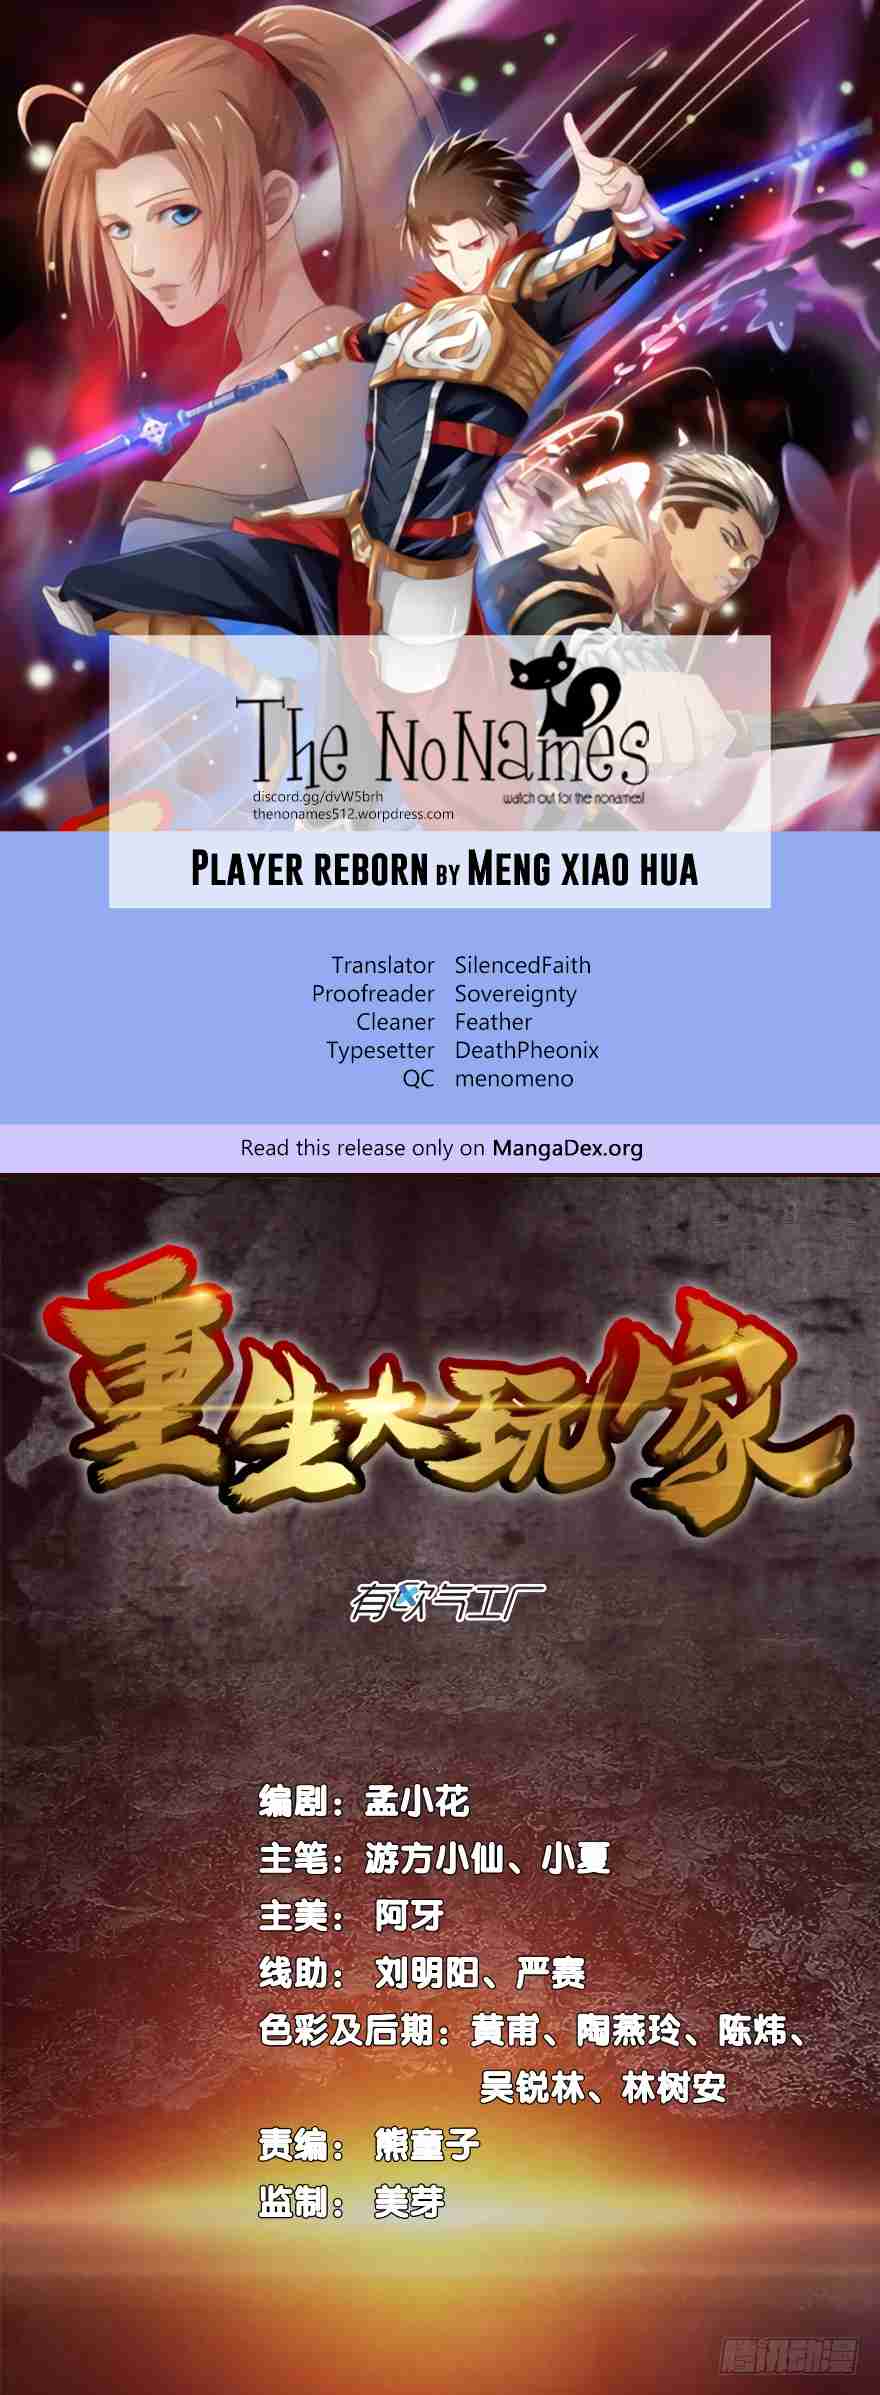 Player Reborn Ch. 12 Madman with the Blade (2)